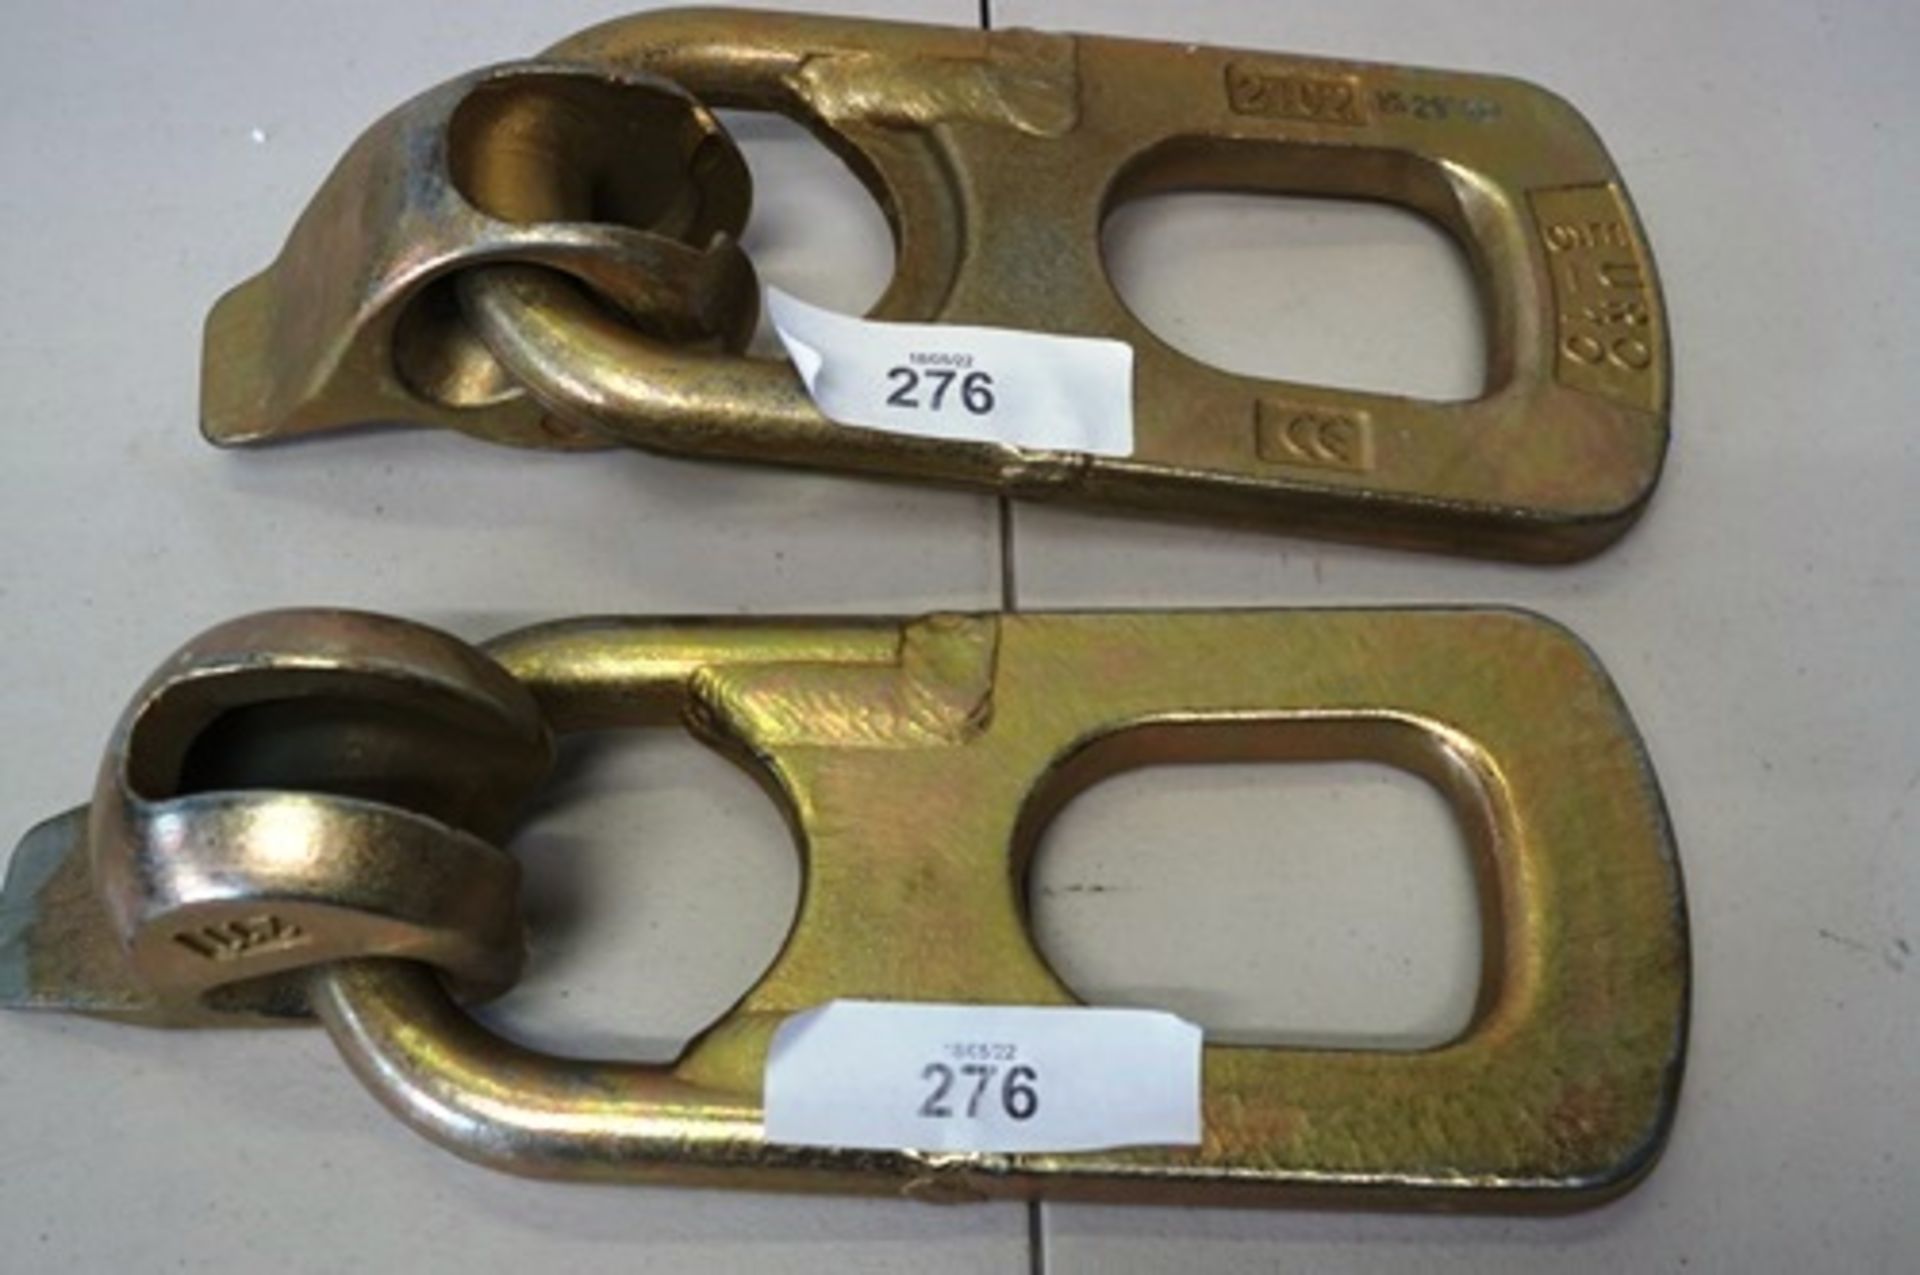 2 x unbranded metal shackles, Ref:- Euro G10210221F111 - New (SW18)